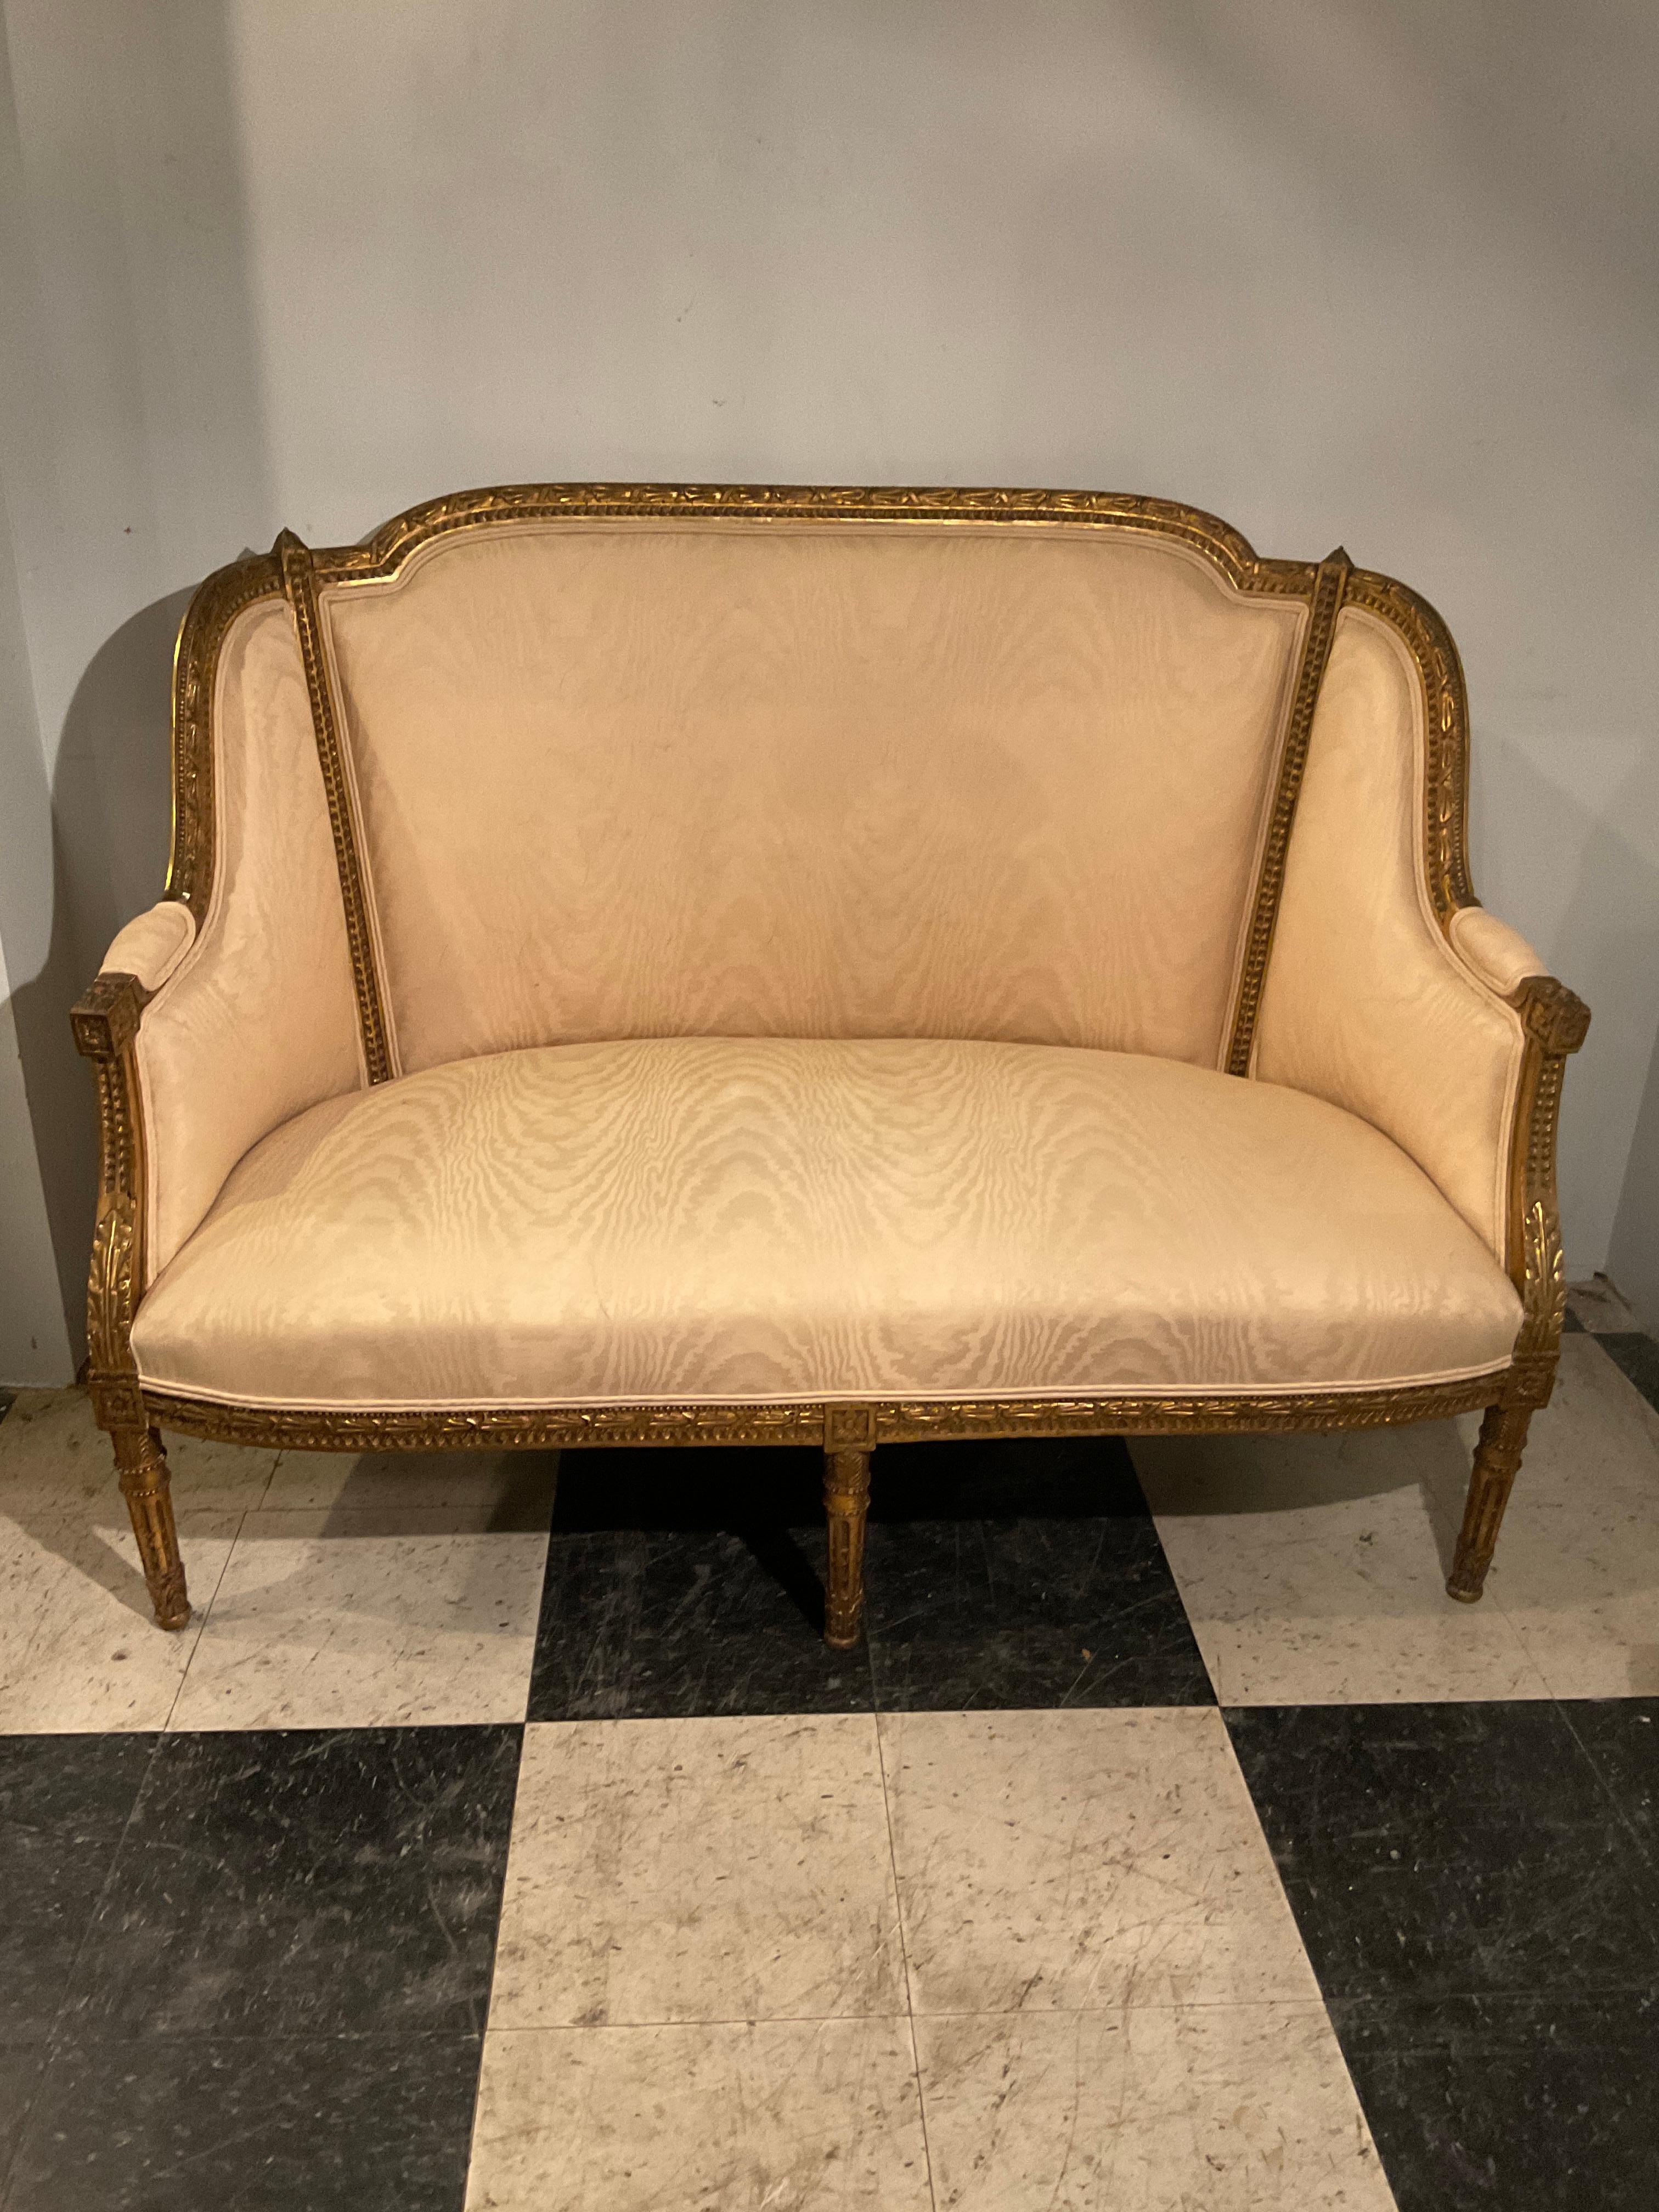 1870s Carved gilt wood Louis XVI French settee. Upholstery is about 12 years old. 